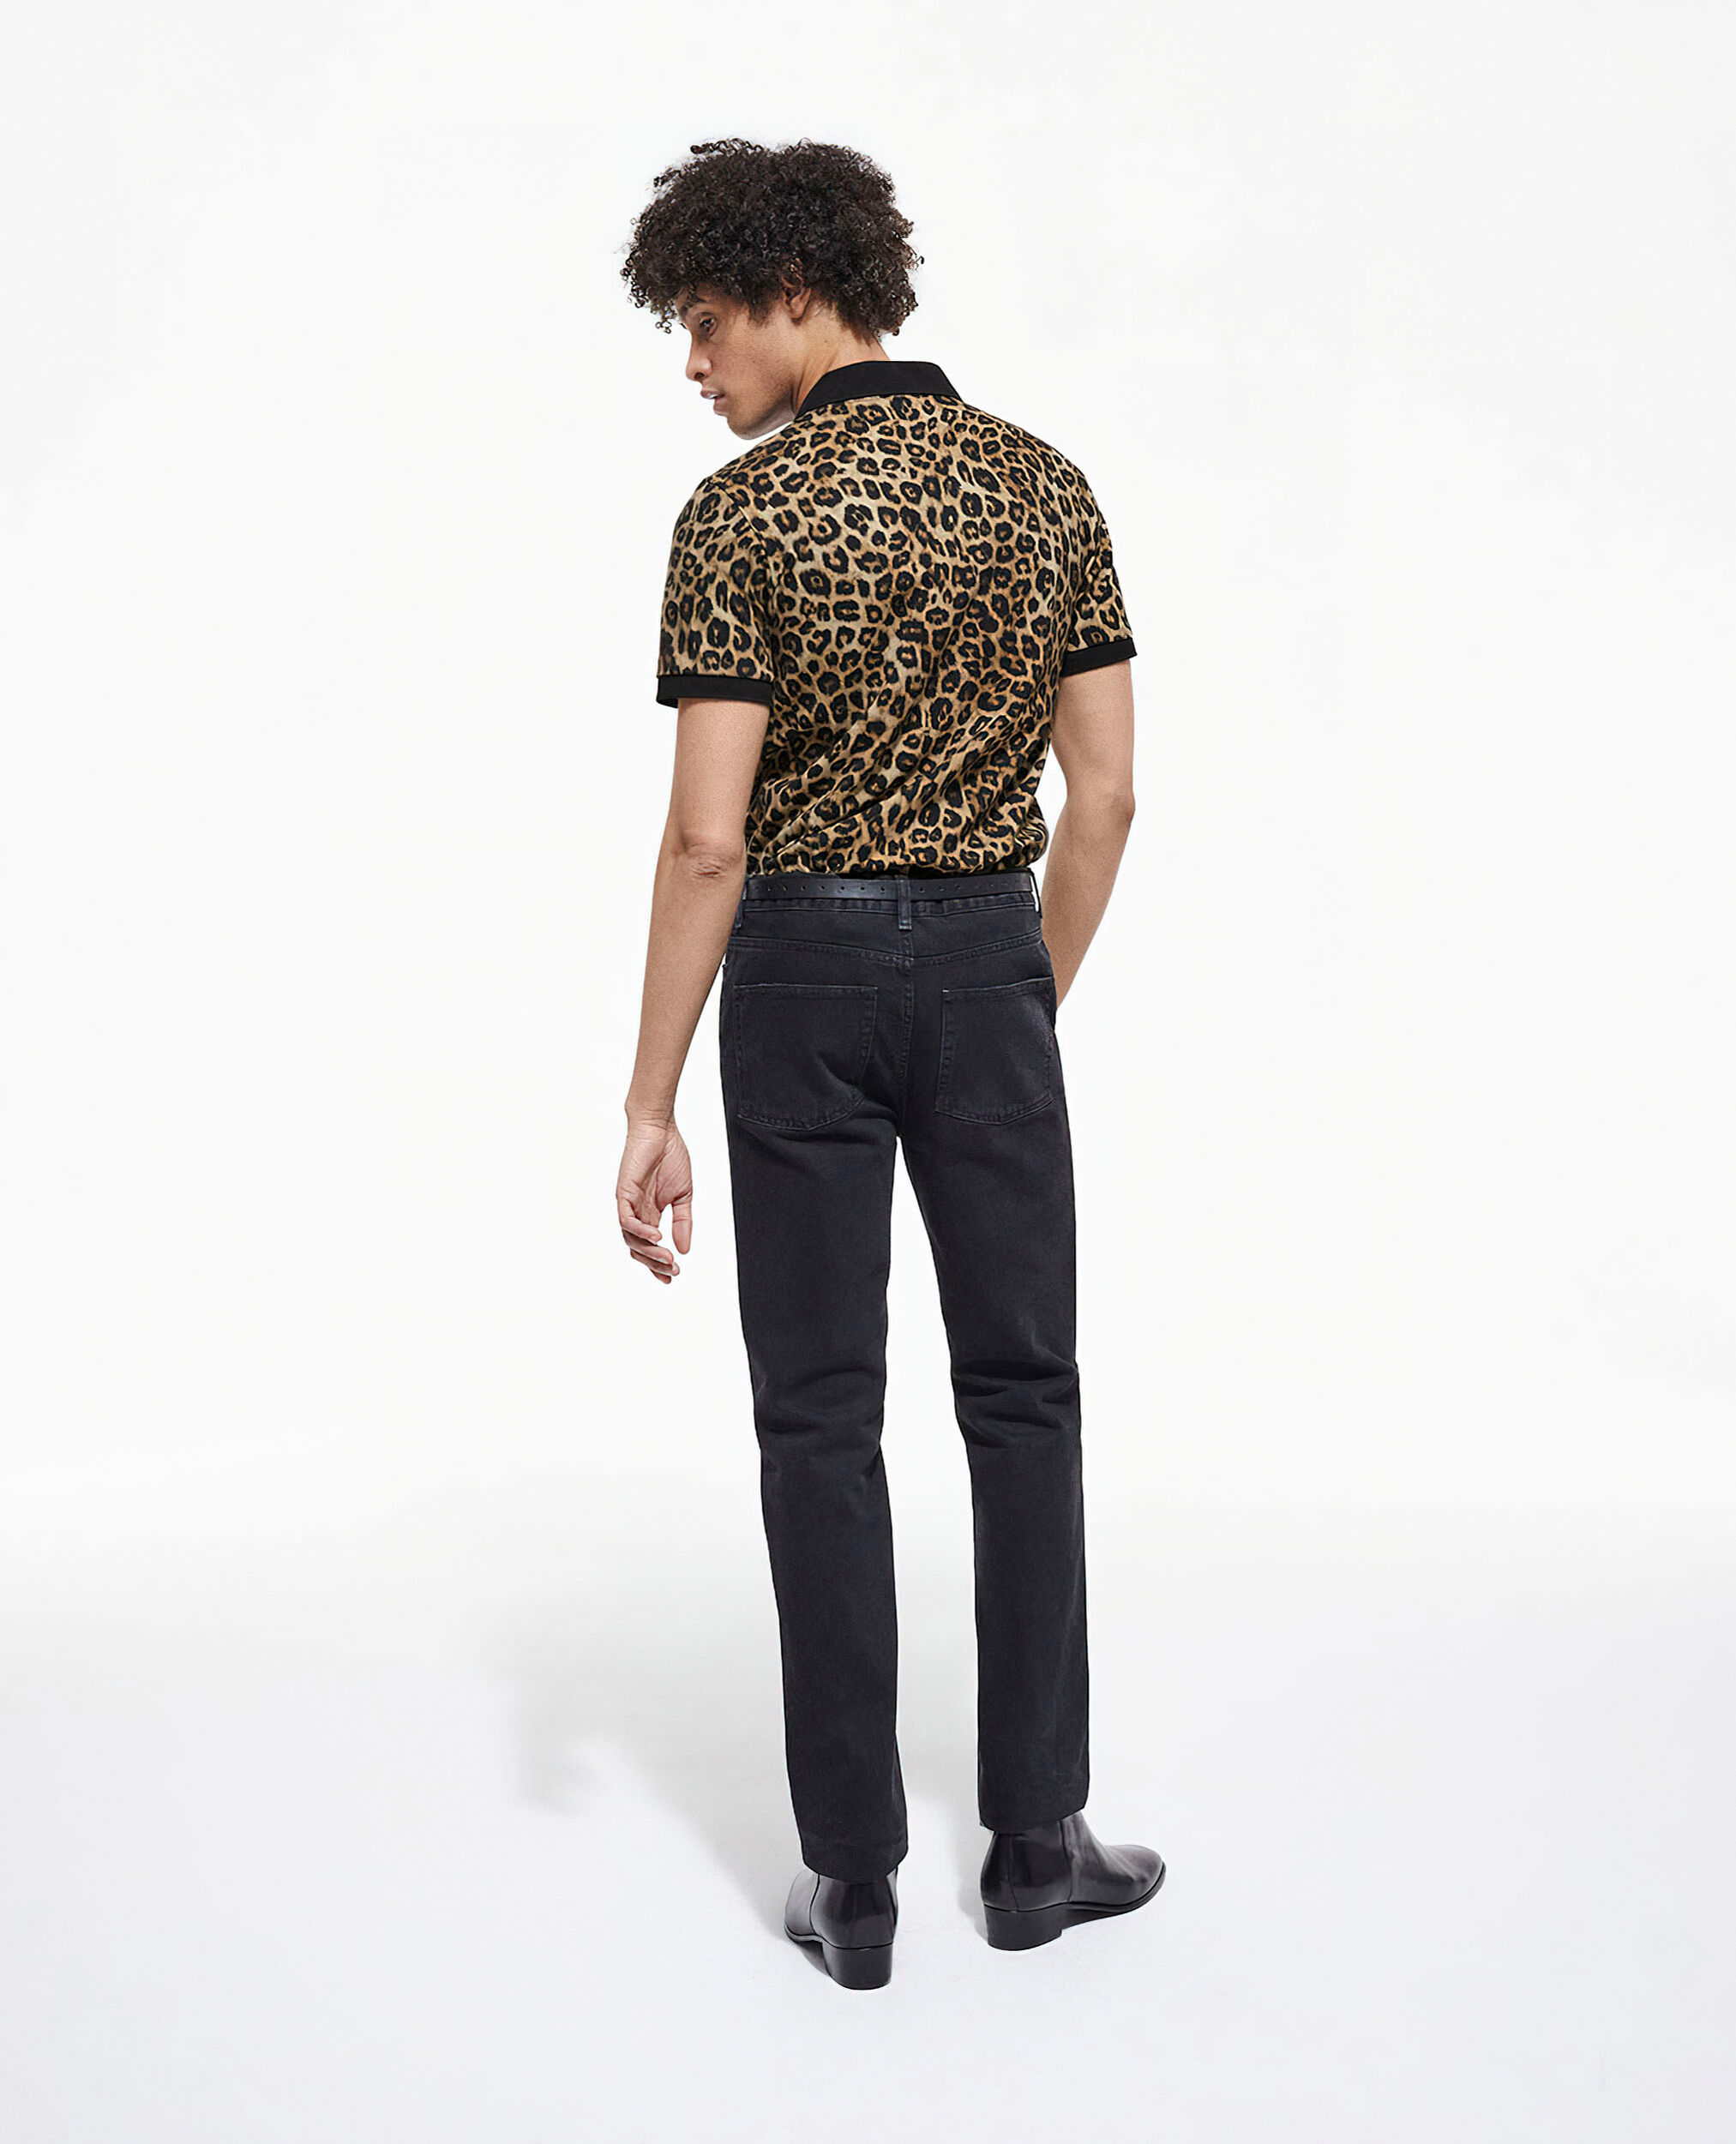 Poloshirt mit Leopardenmuster, LEOPARD, hi-res image number null